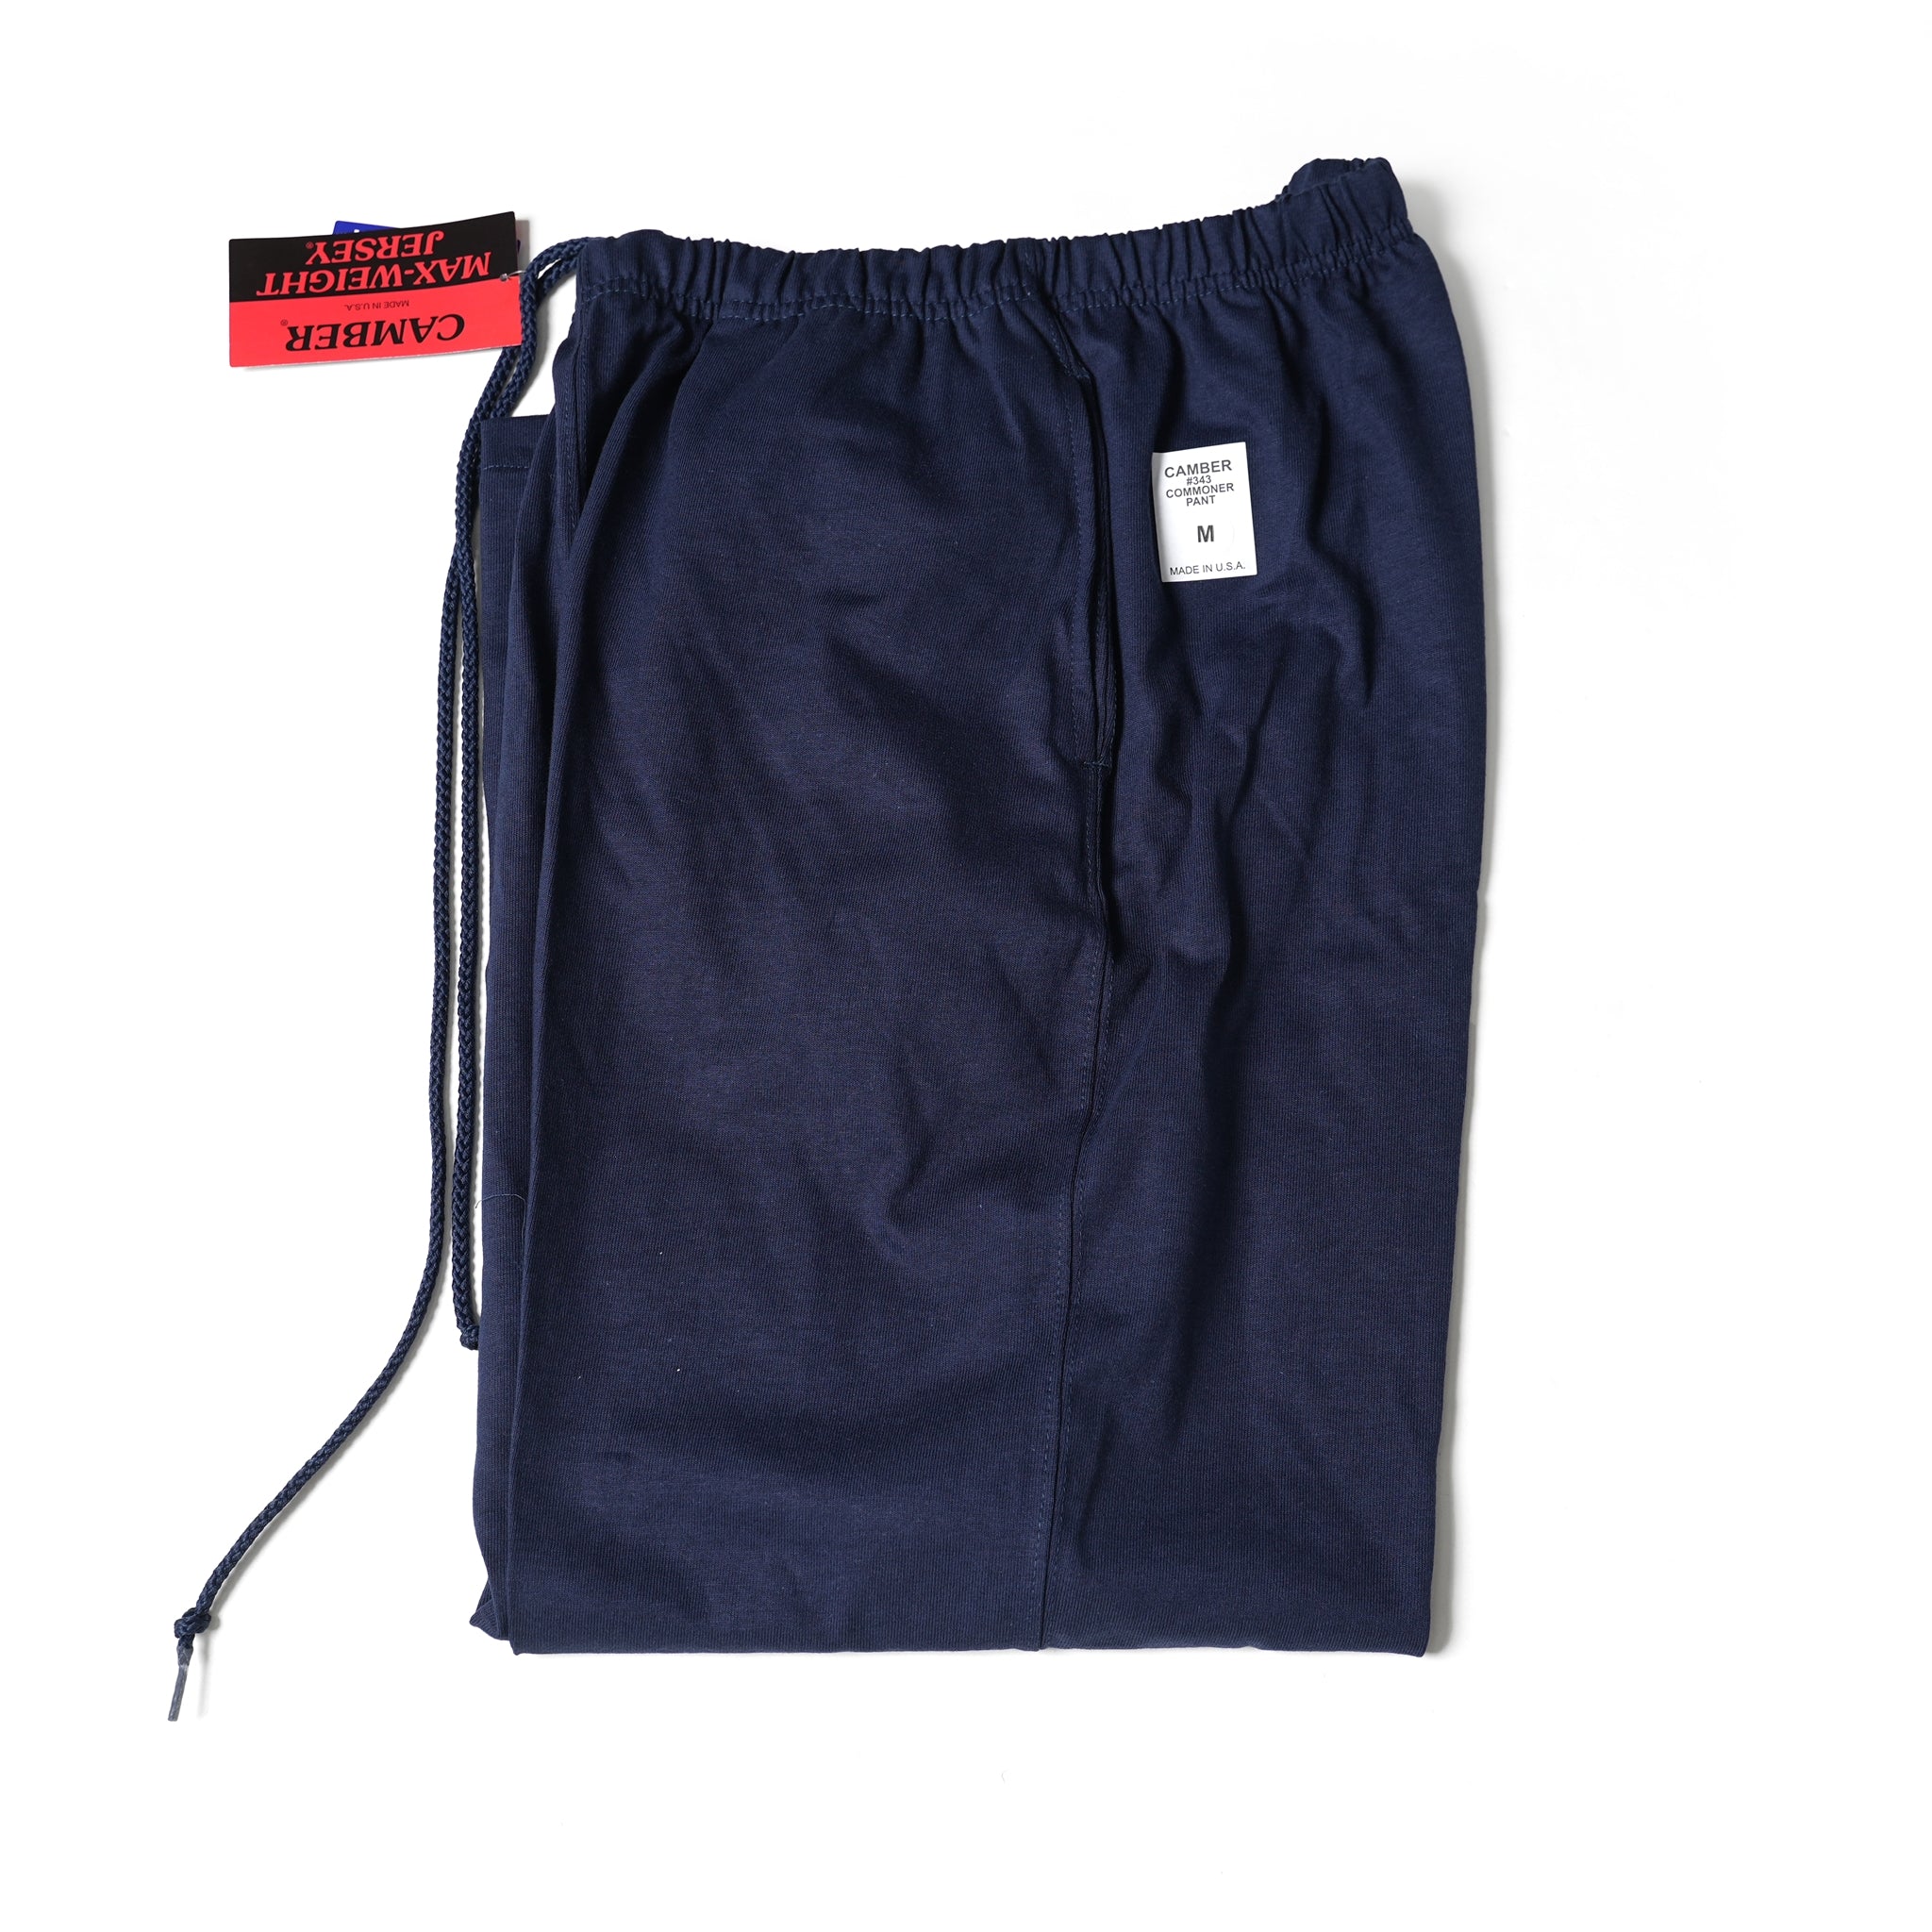 No:#343 | Name:COMMONER PANT_CAMBER 80z MAXXX-WEIGHT COTTON! | Color:8 Colors | Size:S/M/L/XL | 【SMOKE TONE×CAMBER】【DG THE DRY GOODS】